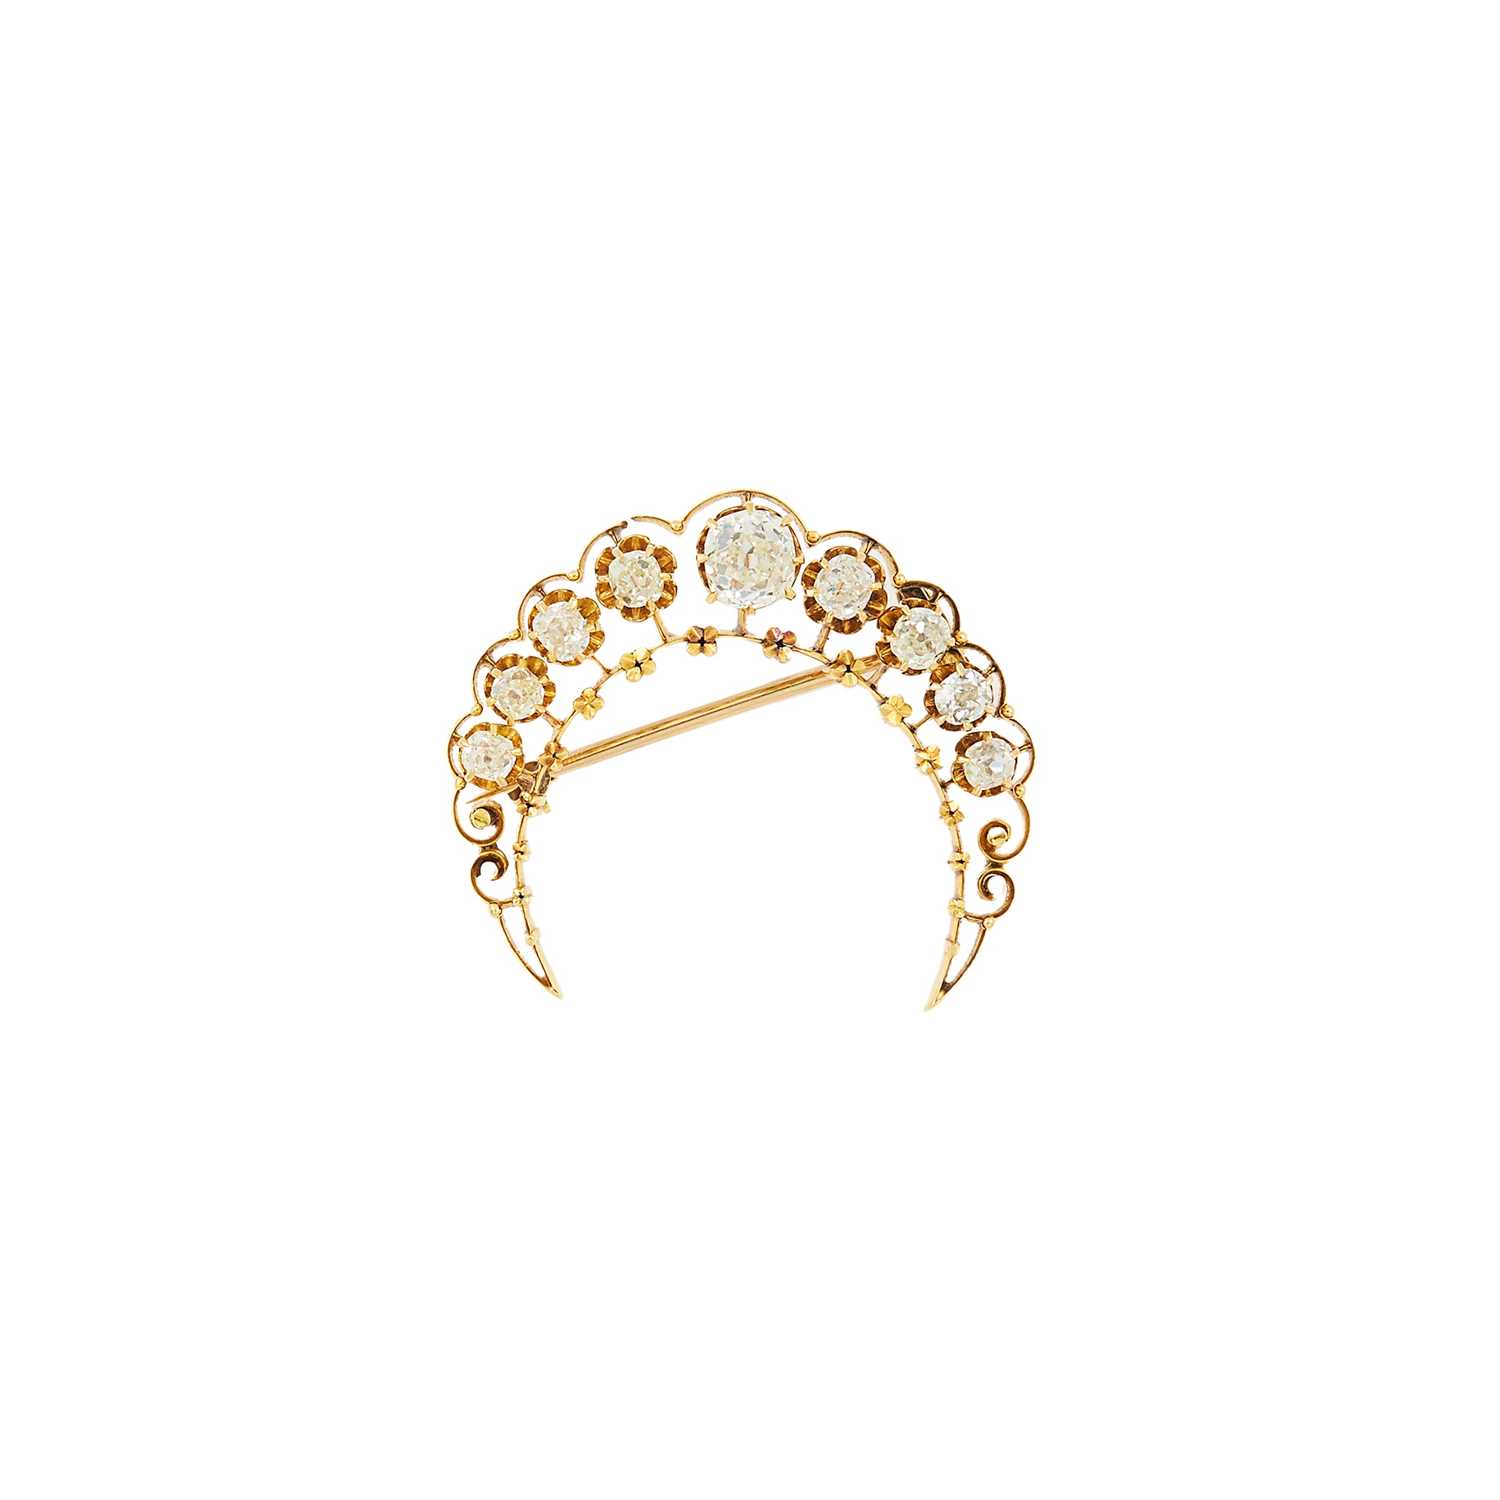 Lot 1156 - Gold and Diamond Crescent Brooch